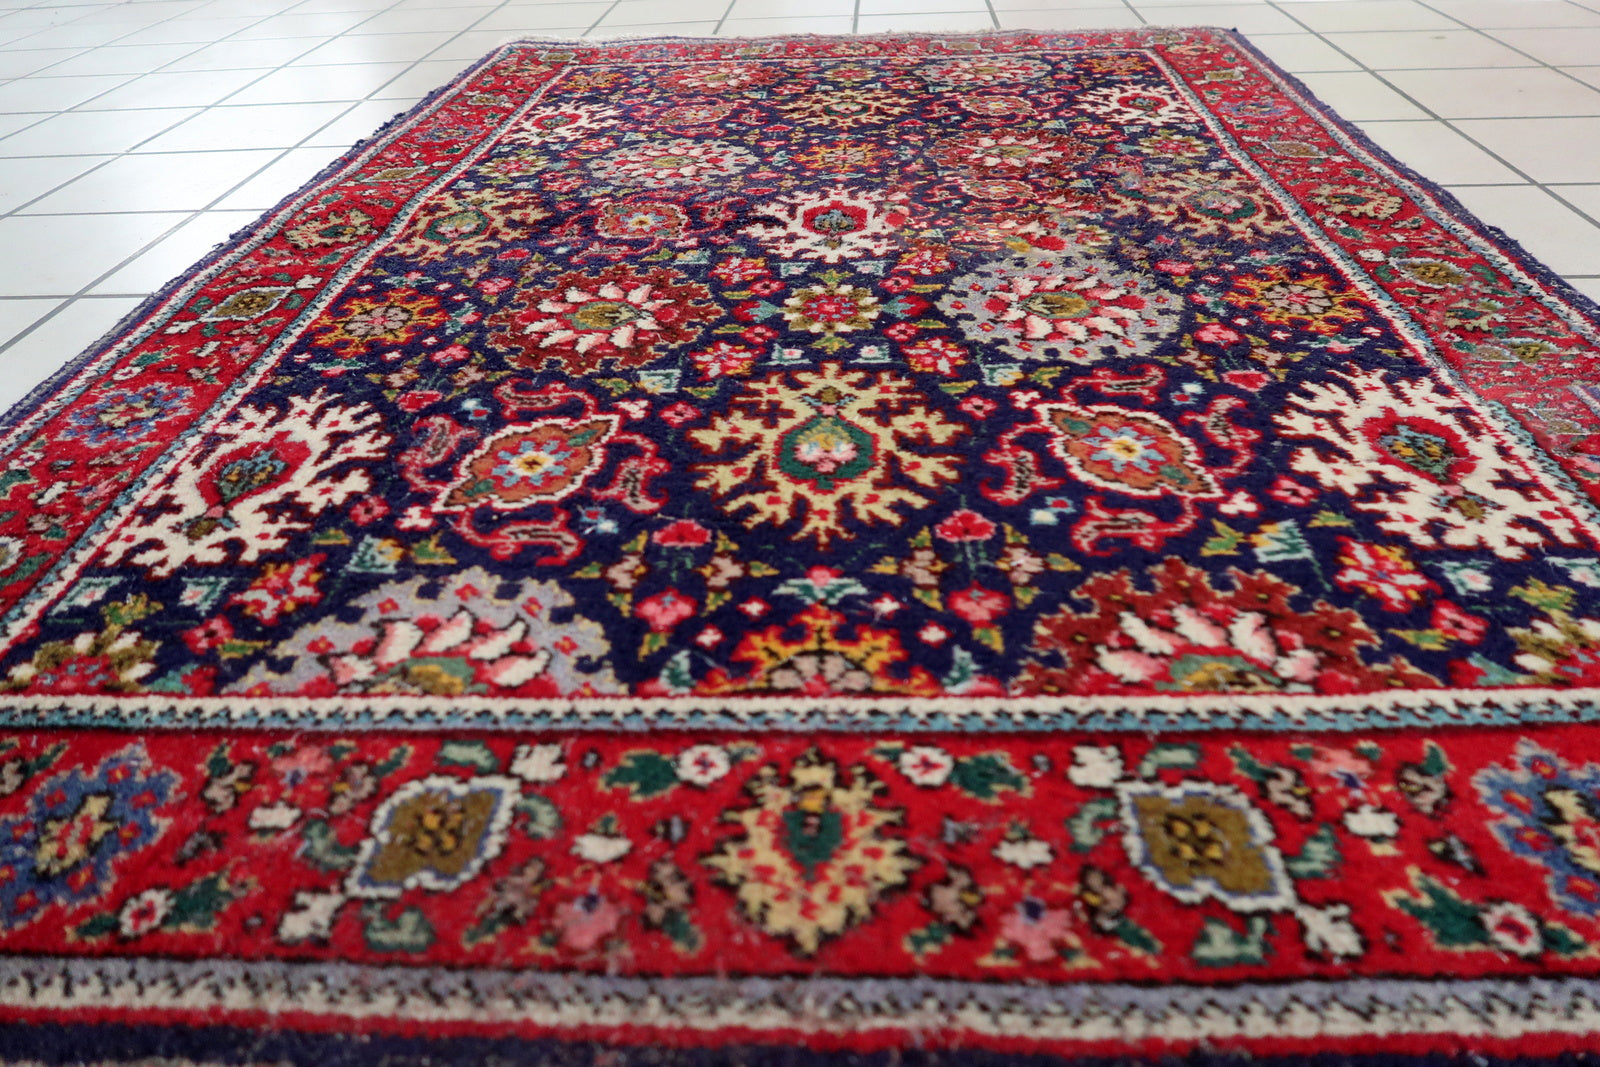 Handmade vintage Persian Tabriz rug in floral design and unusual purple background. The rug is from the middle of 20th century in good condition, it has some old restorations.